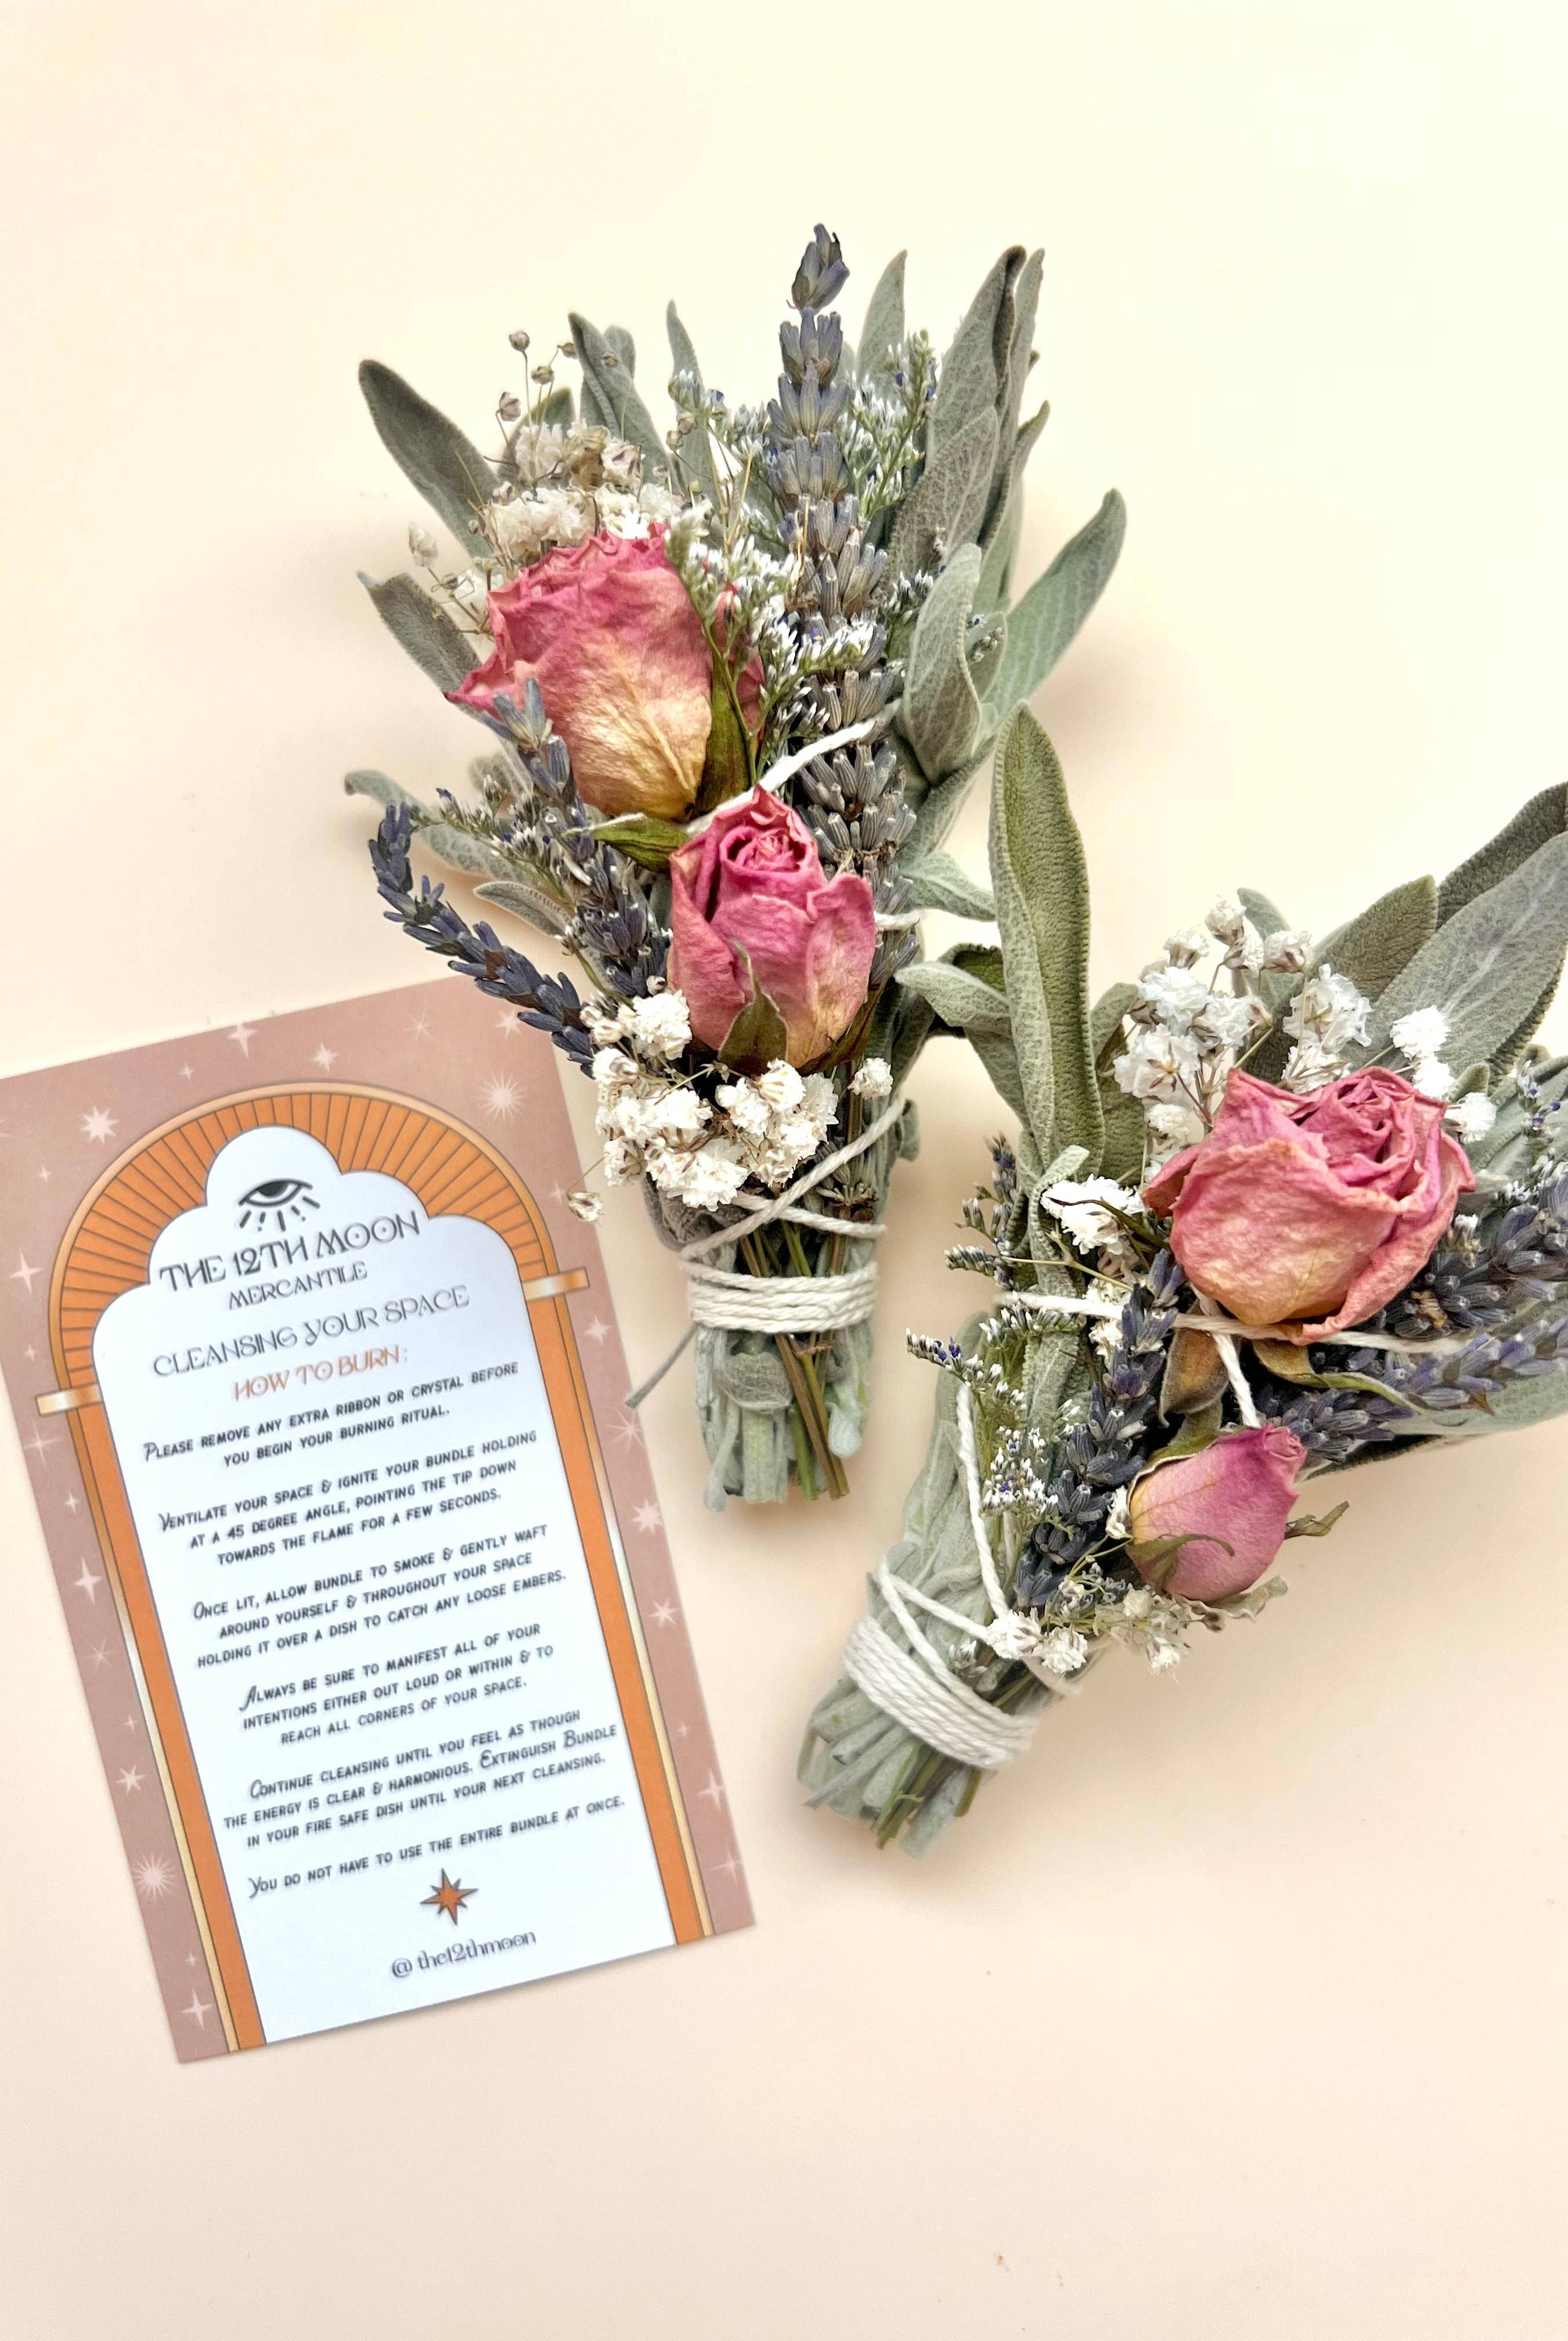 Two small floral bouquets with dried roses and lavender next to a MAGIC RITUALS Mini Sage Smudge Bundle - Smoke Cleanser on a pale background, infused with essential oil for aromatherapy benefits by The 12th Moon.